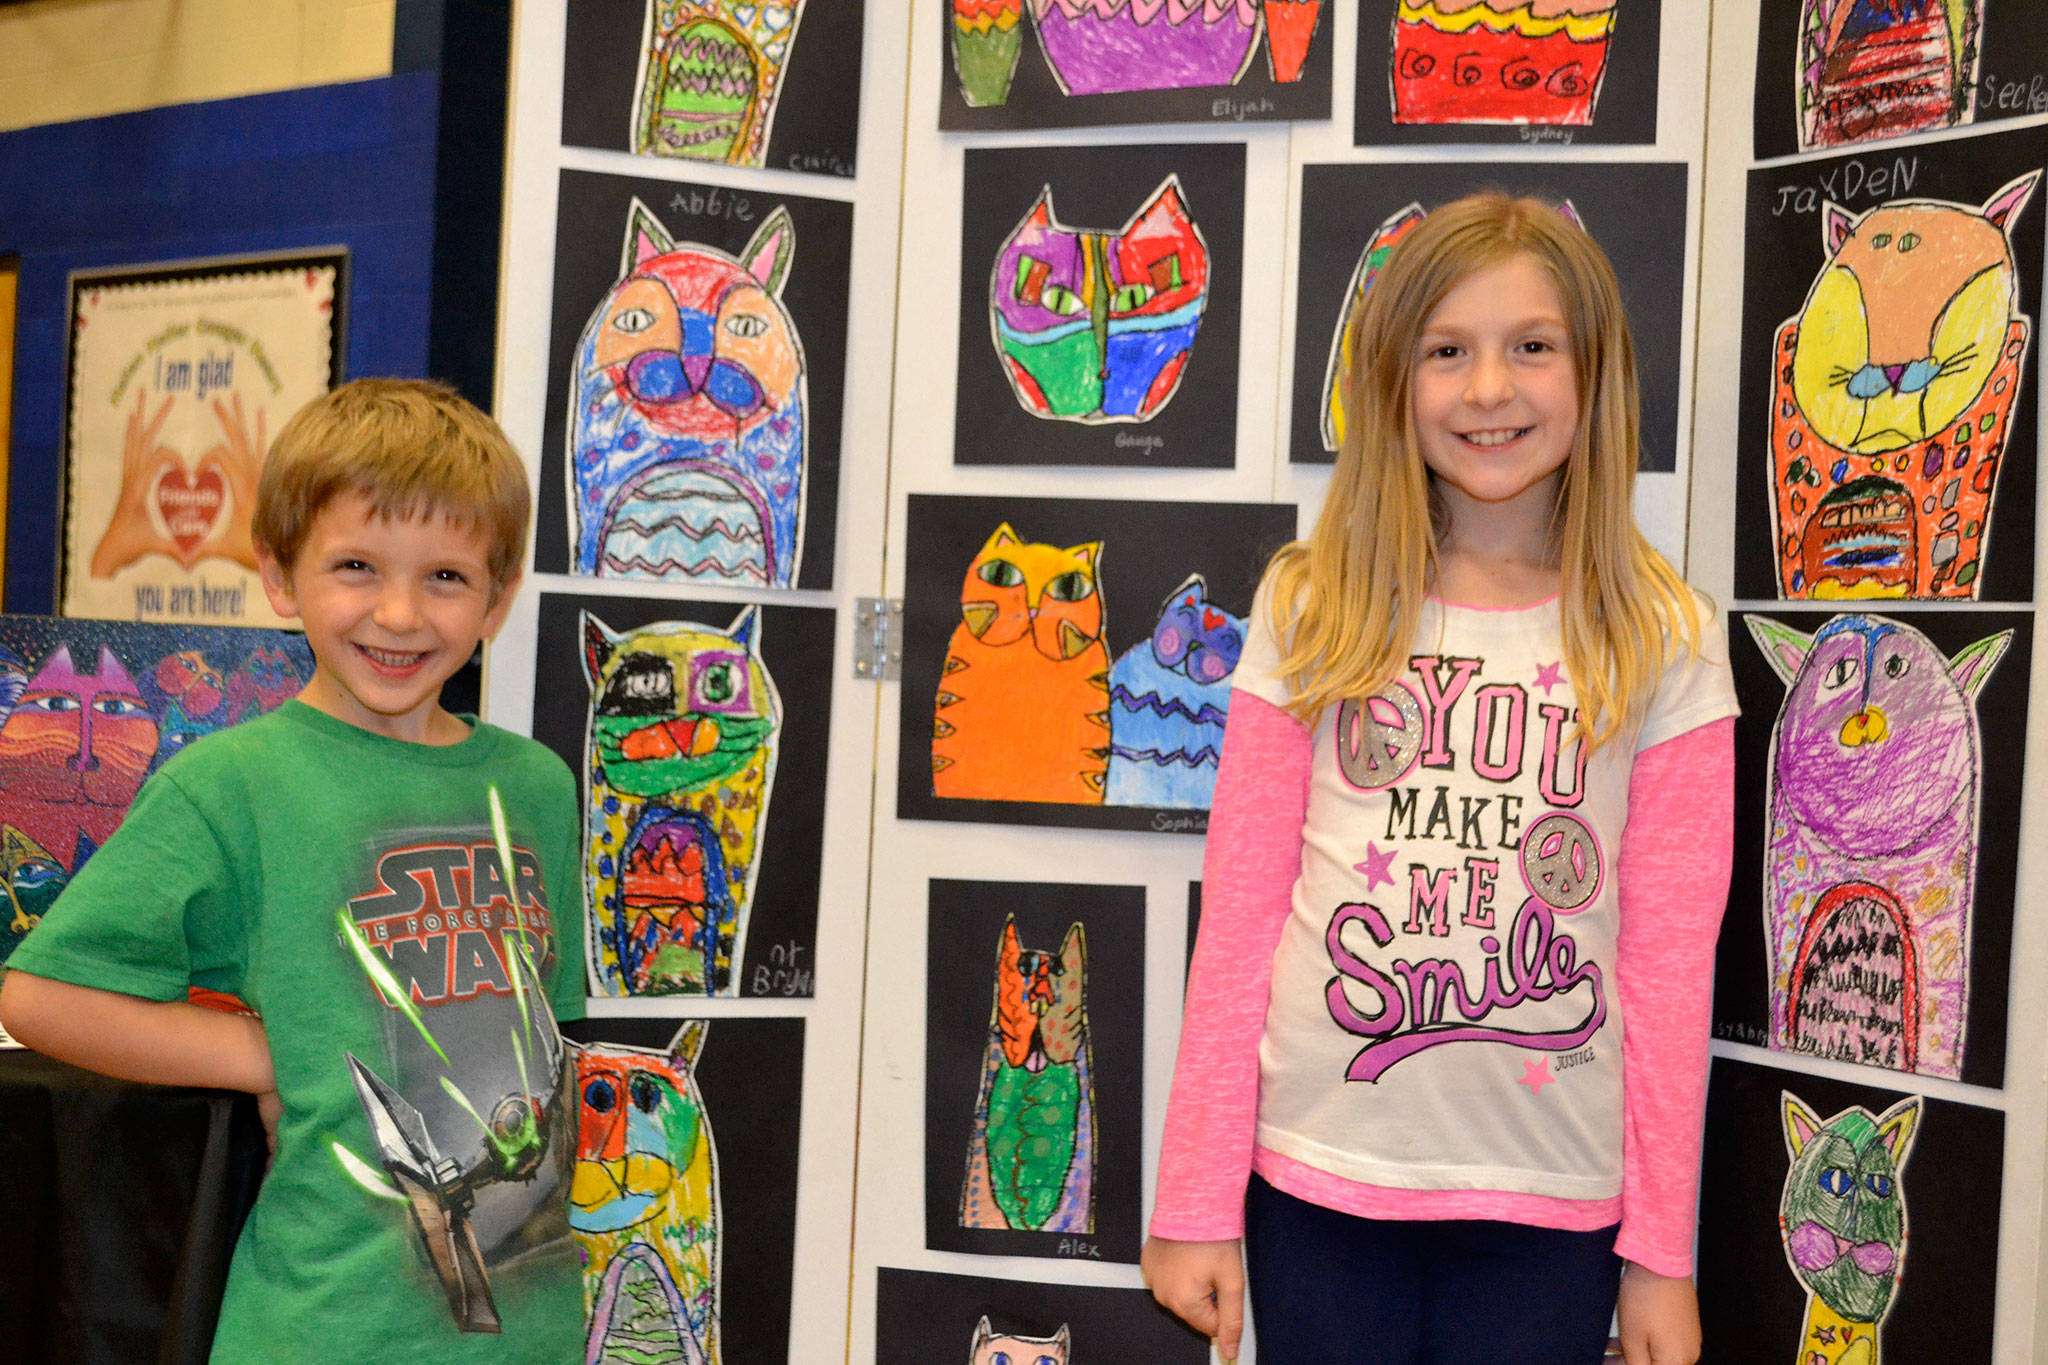 Bryant, 6, and Sophia Lawson, 9, of Stephanie Grotzke-Nash and Rachel Oden’s art classes, both enjoyed their pieces following Laurel Burch’s style. “I put the most into this one,” Sophia said. I thought it’d be fun and I love cats.” “I love cats too,” Bryant said.